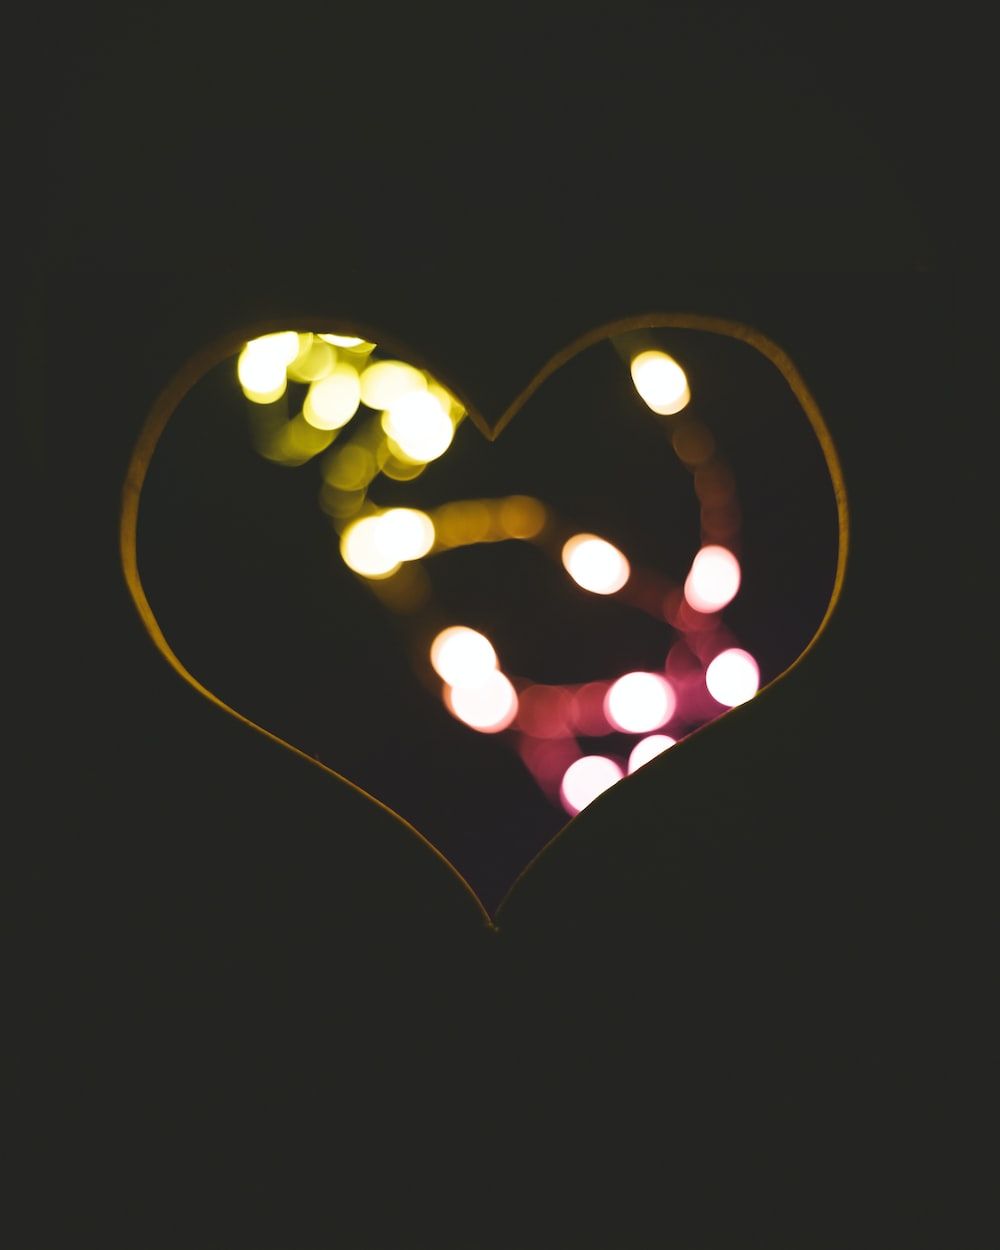 A heart shape made out of lights in the dark. - Black heart